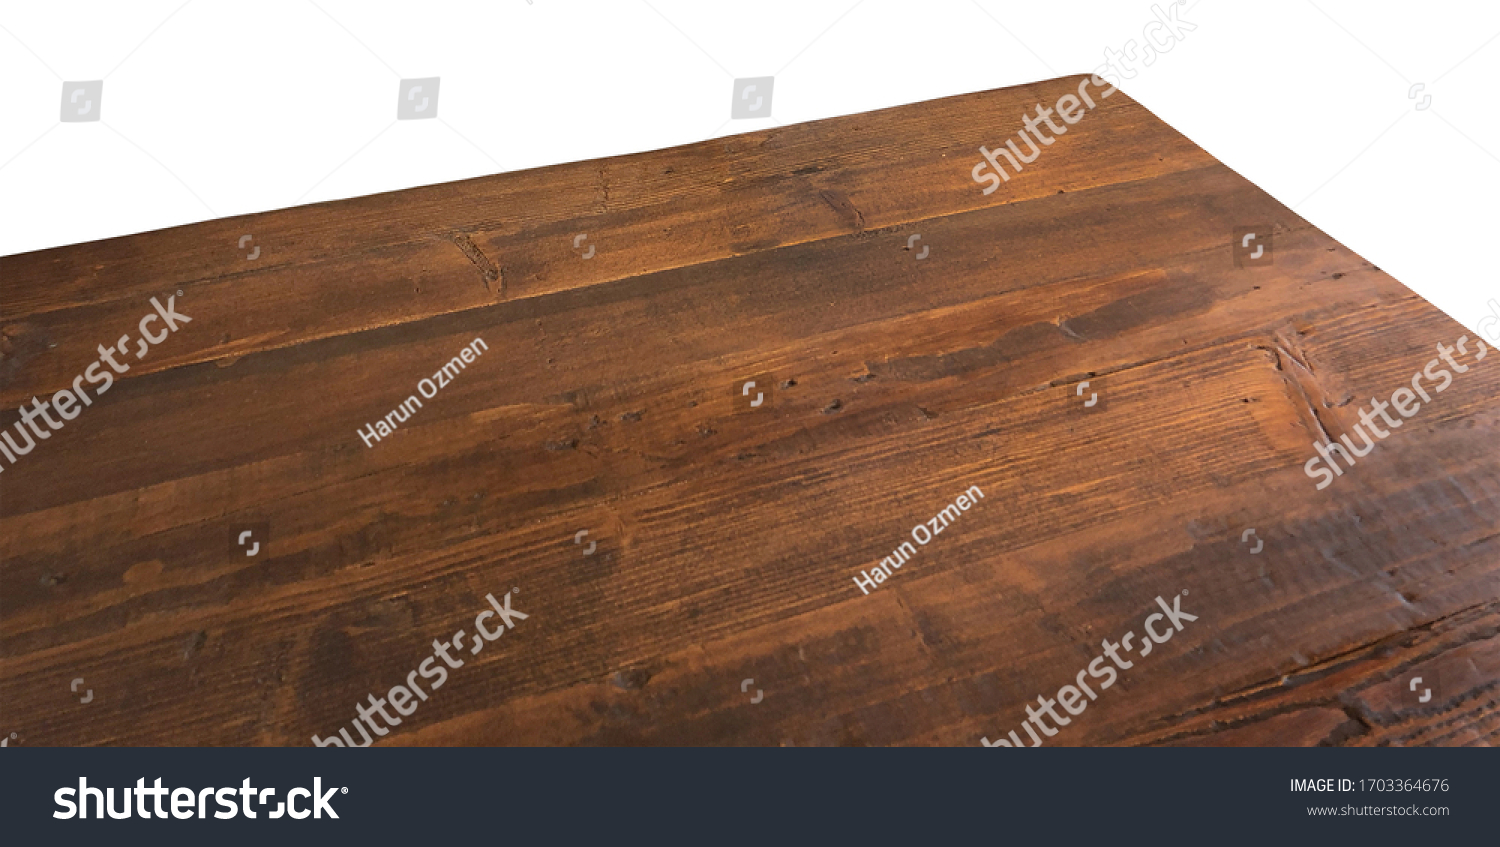 Perspective view of wood or wooden table corner isolated on white background including clipping path
 #1703364676